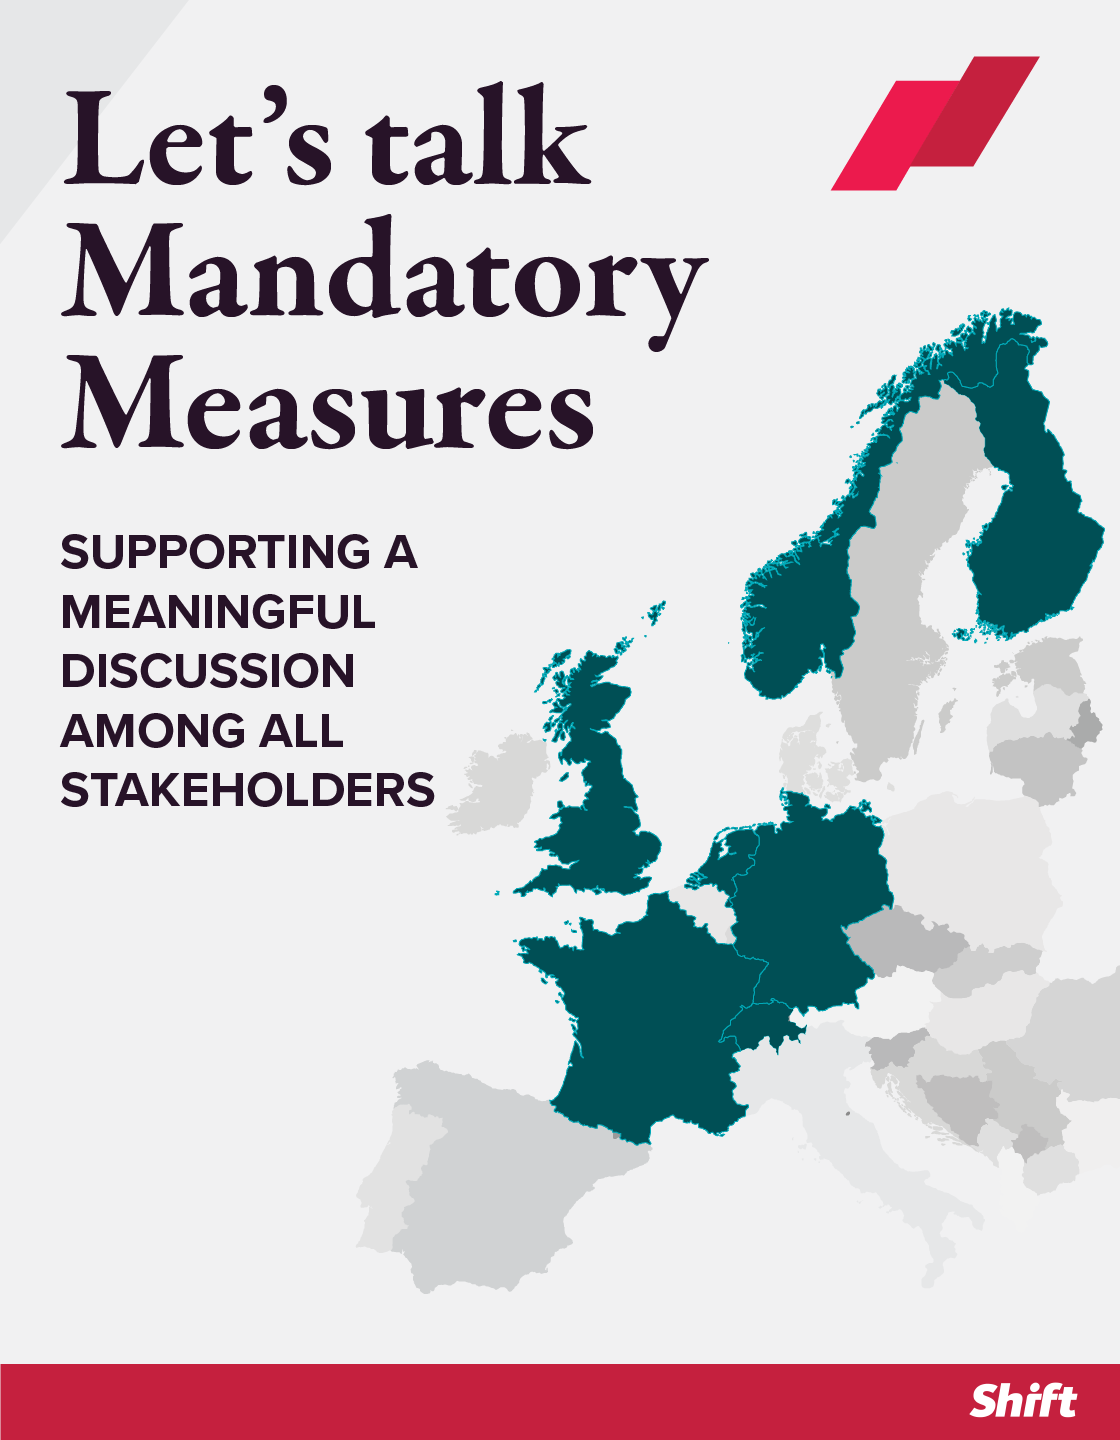 Let’s Talk Mandatory Measures: Supporting a Meaningful Discussion Among all Stakeholders